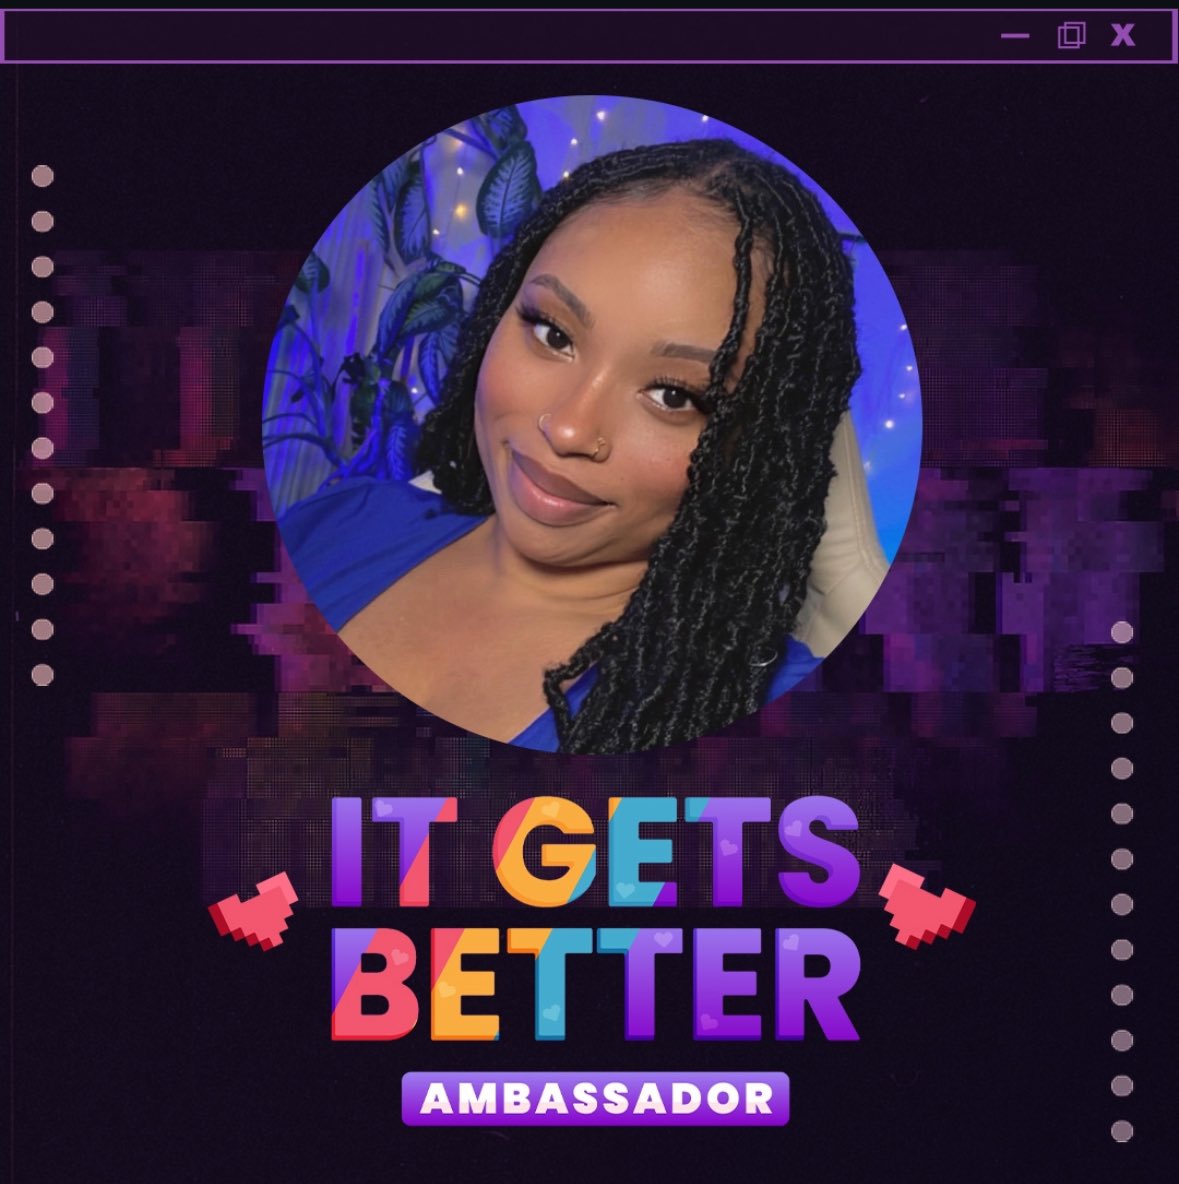 💜🩷💛🩵💜

Such an honor to be invited as an Ambassador for ItGetsBetter! You can catch me and so many amazing creators live on Twitch! Thank you for all your support on the channel and for sharing your stories. We are making things better - period! 

💜🩷💛🩵💜